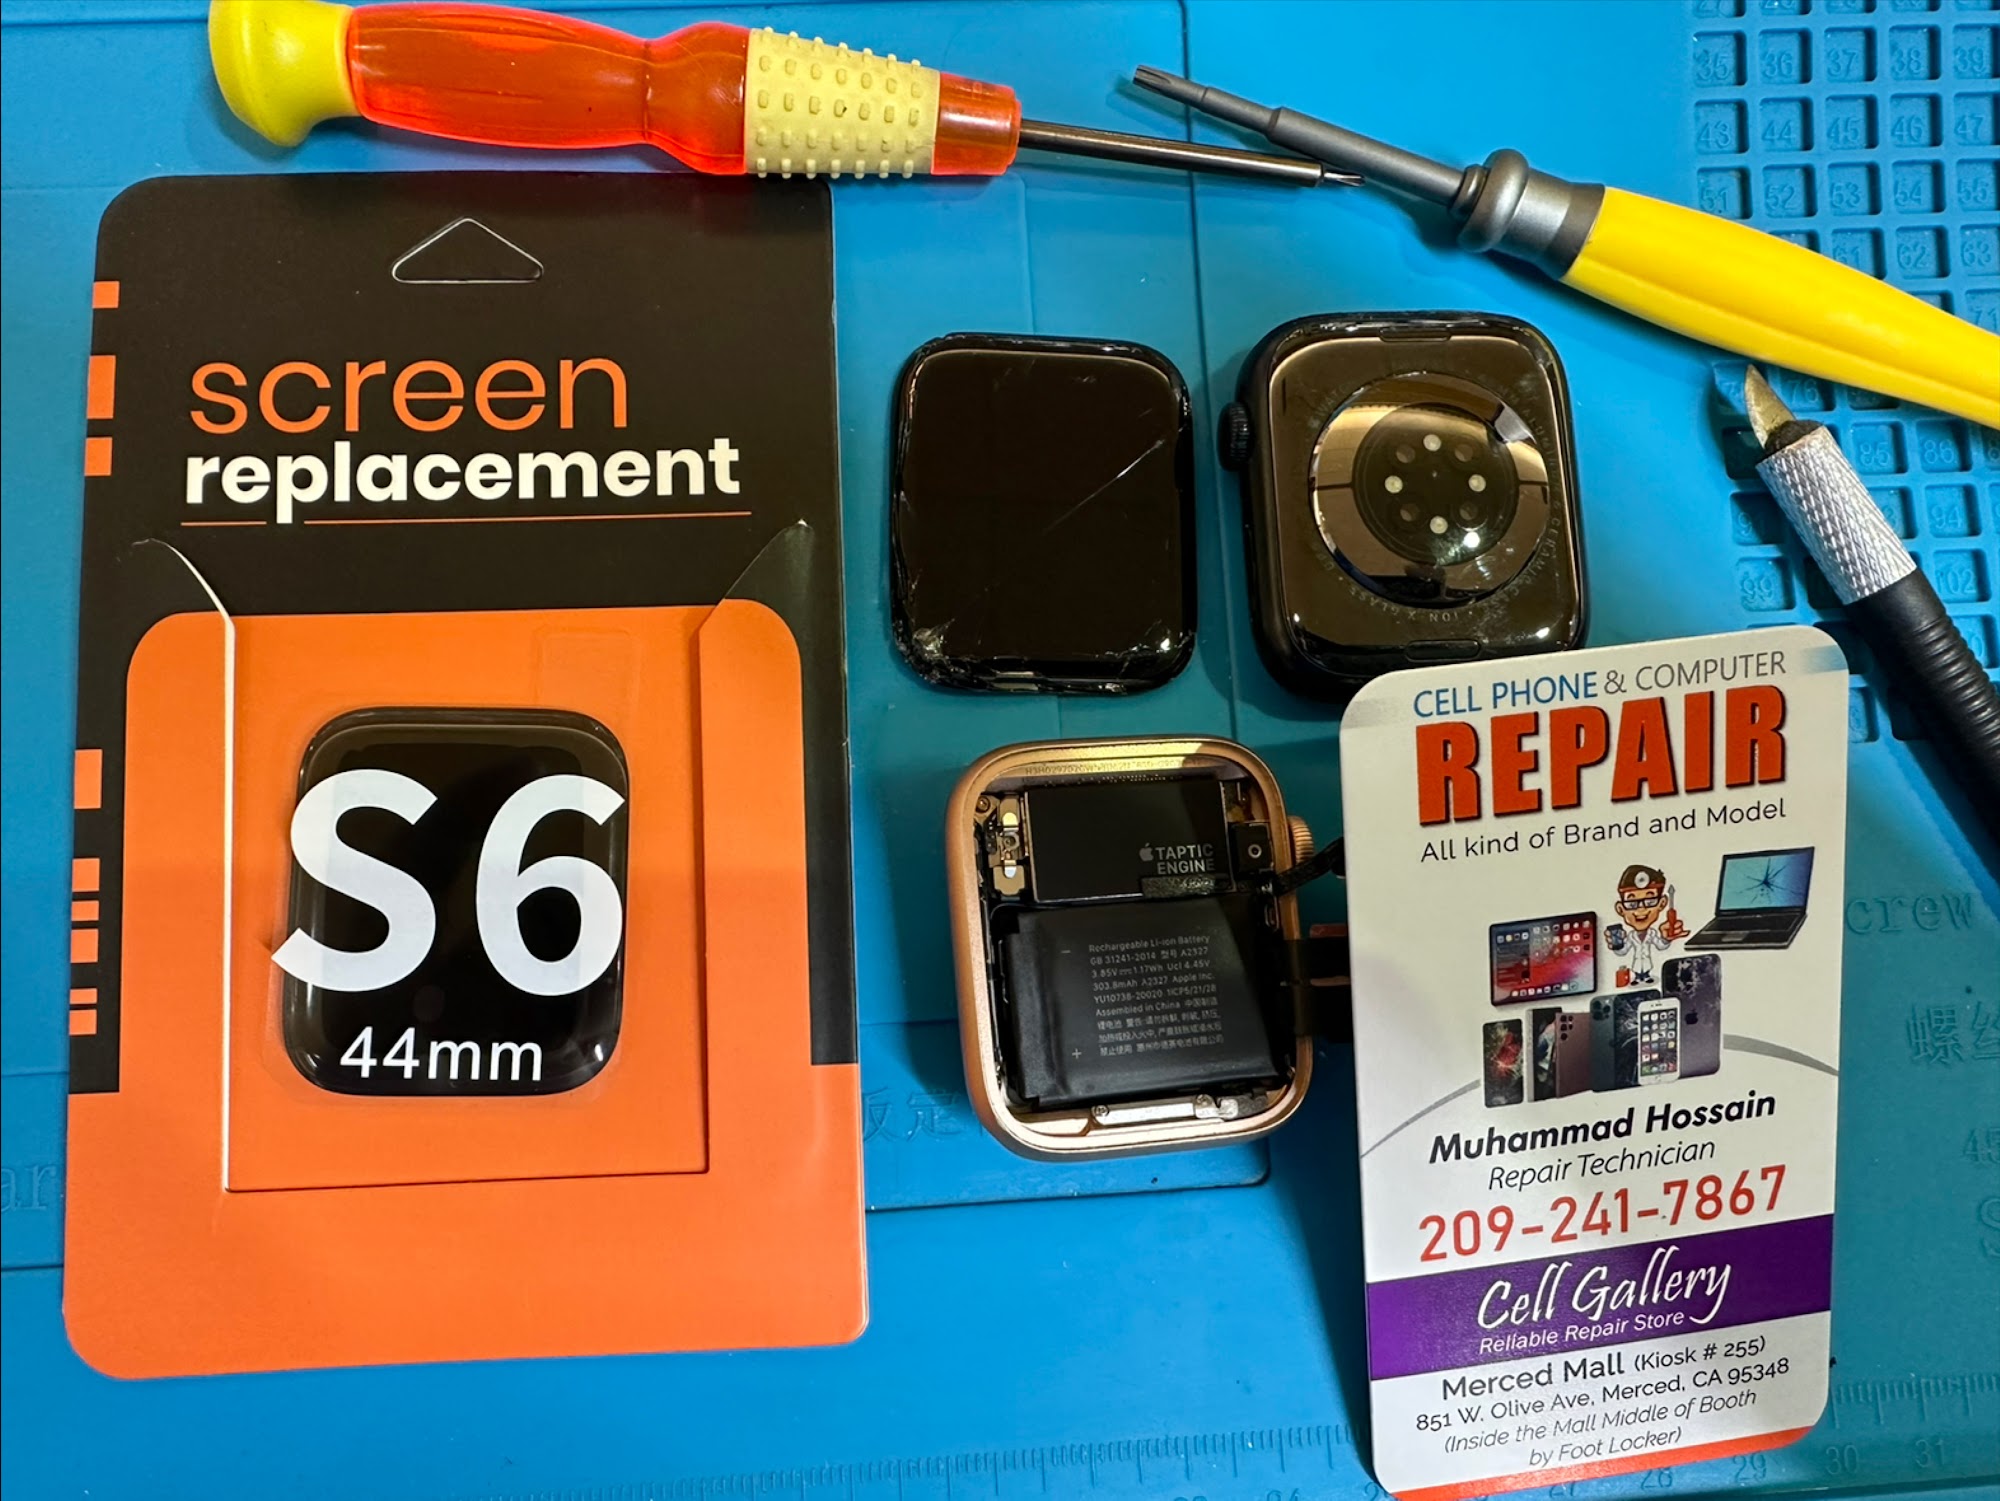 Cell Gallery - phone repair at Merced Mall